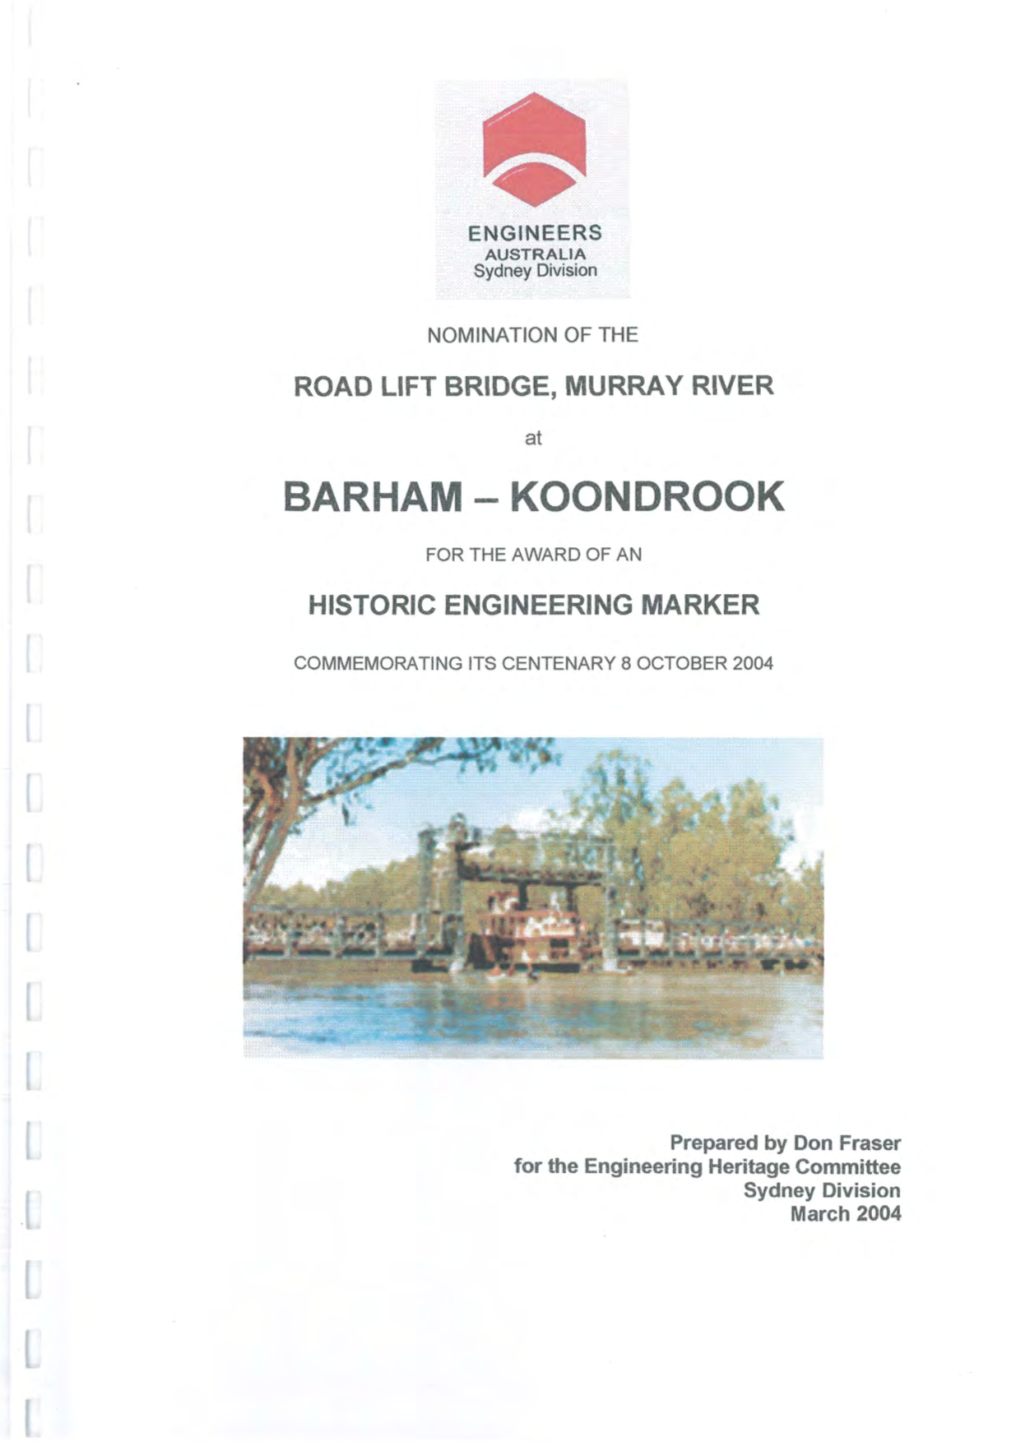 Barham-Koondrook Bridge Receive an Historic Engineeling Marker Award As an Historic Engineering Work and in Commeltioration of Its 8 October 2004 Centenary